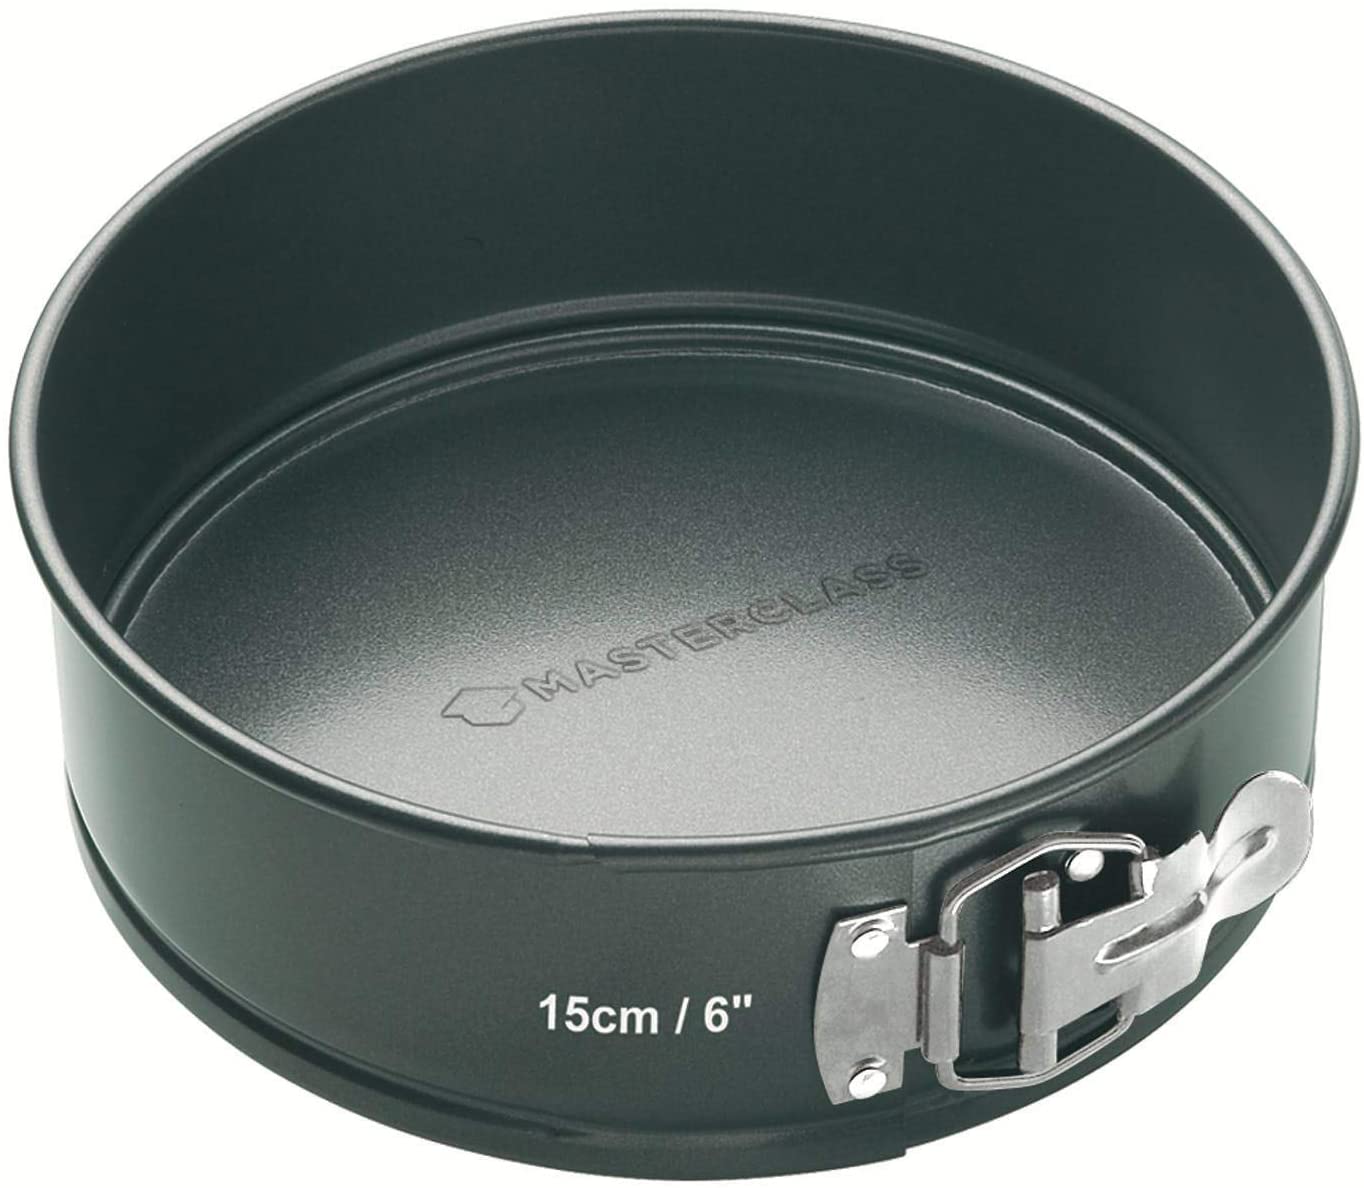 KitchenCraft Master Class 15cm Non-Stick Spring Form Quick Release Cake Pan With Loose Base